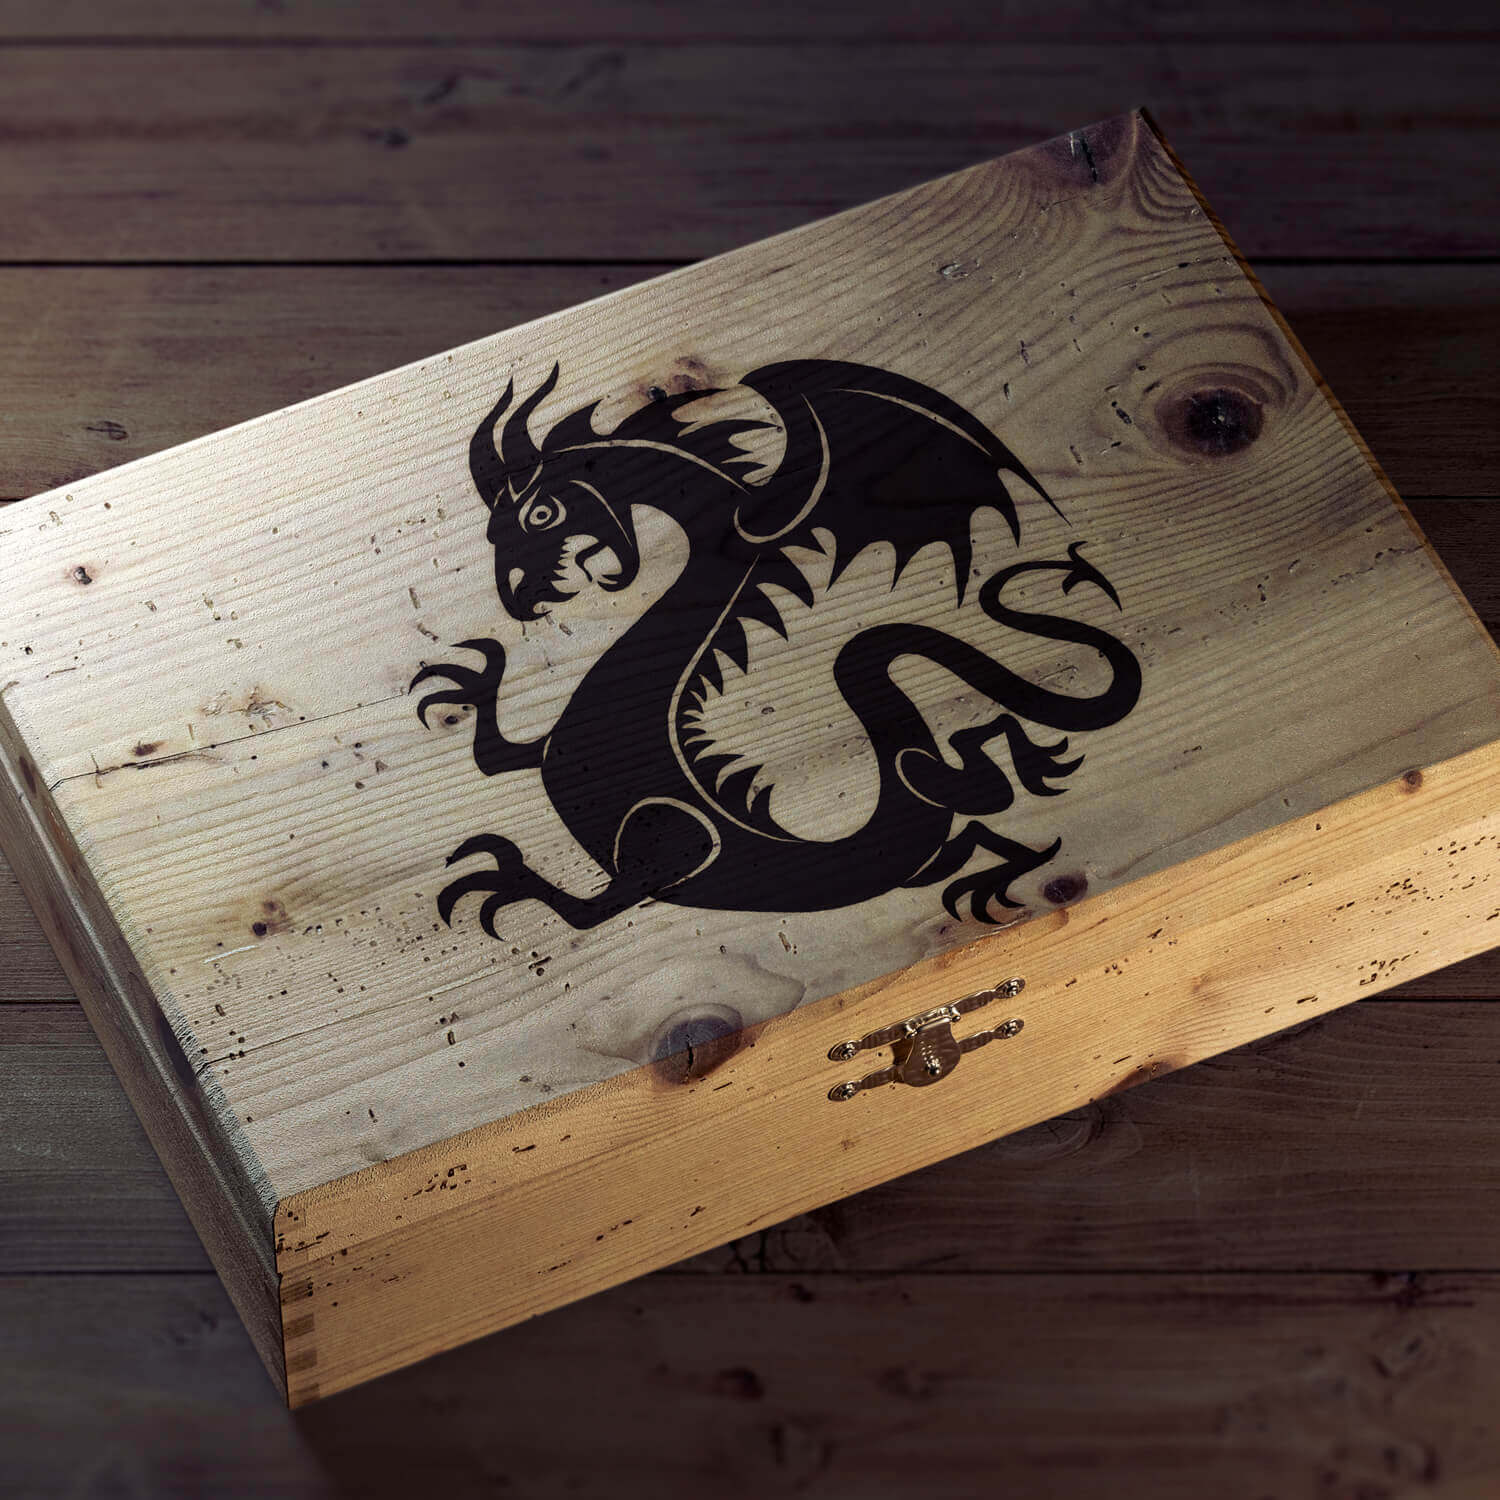 A silhouette of a wild dragon is depicted on the wooden piggy bank.